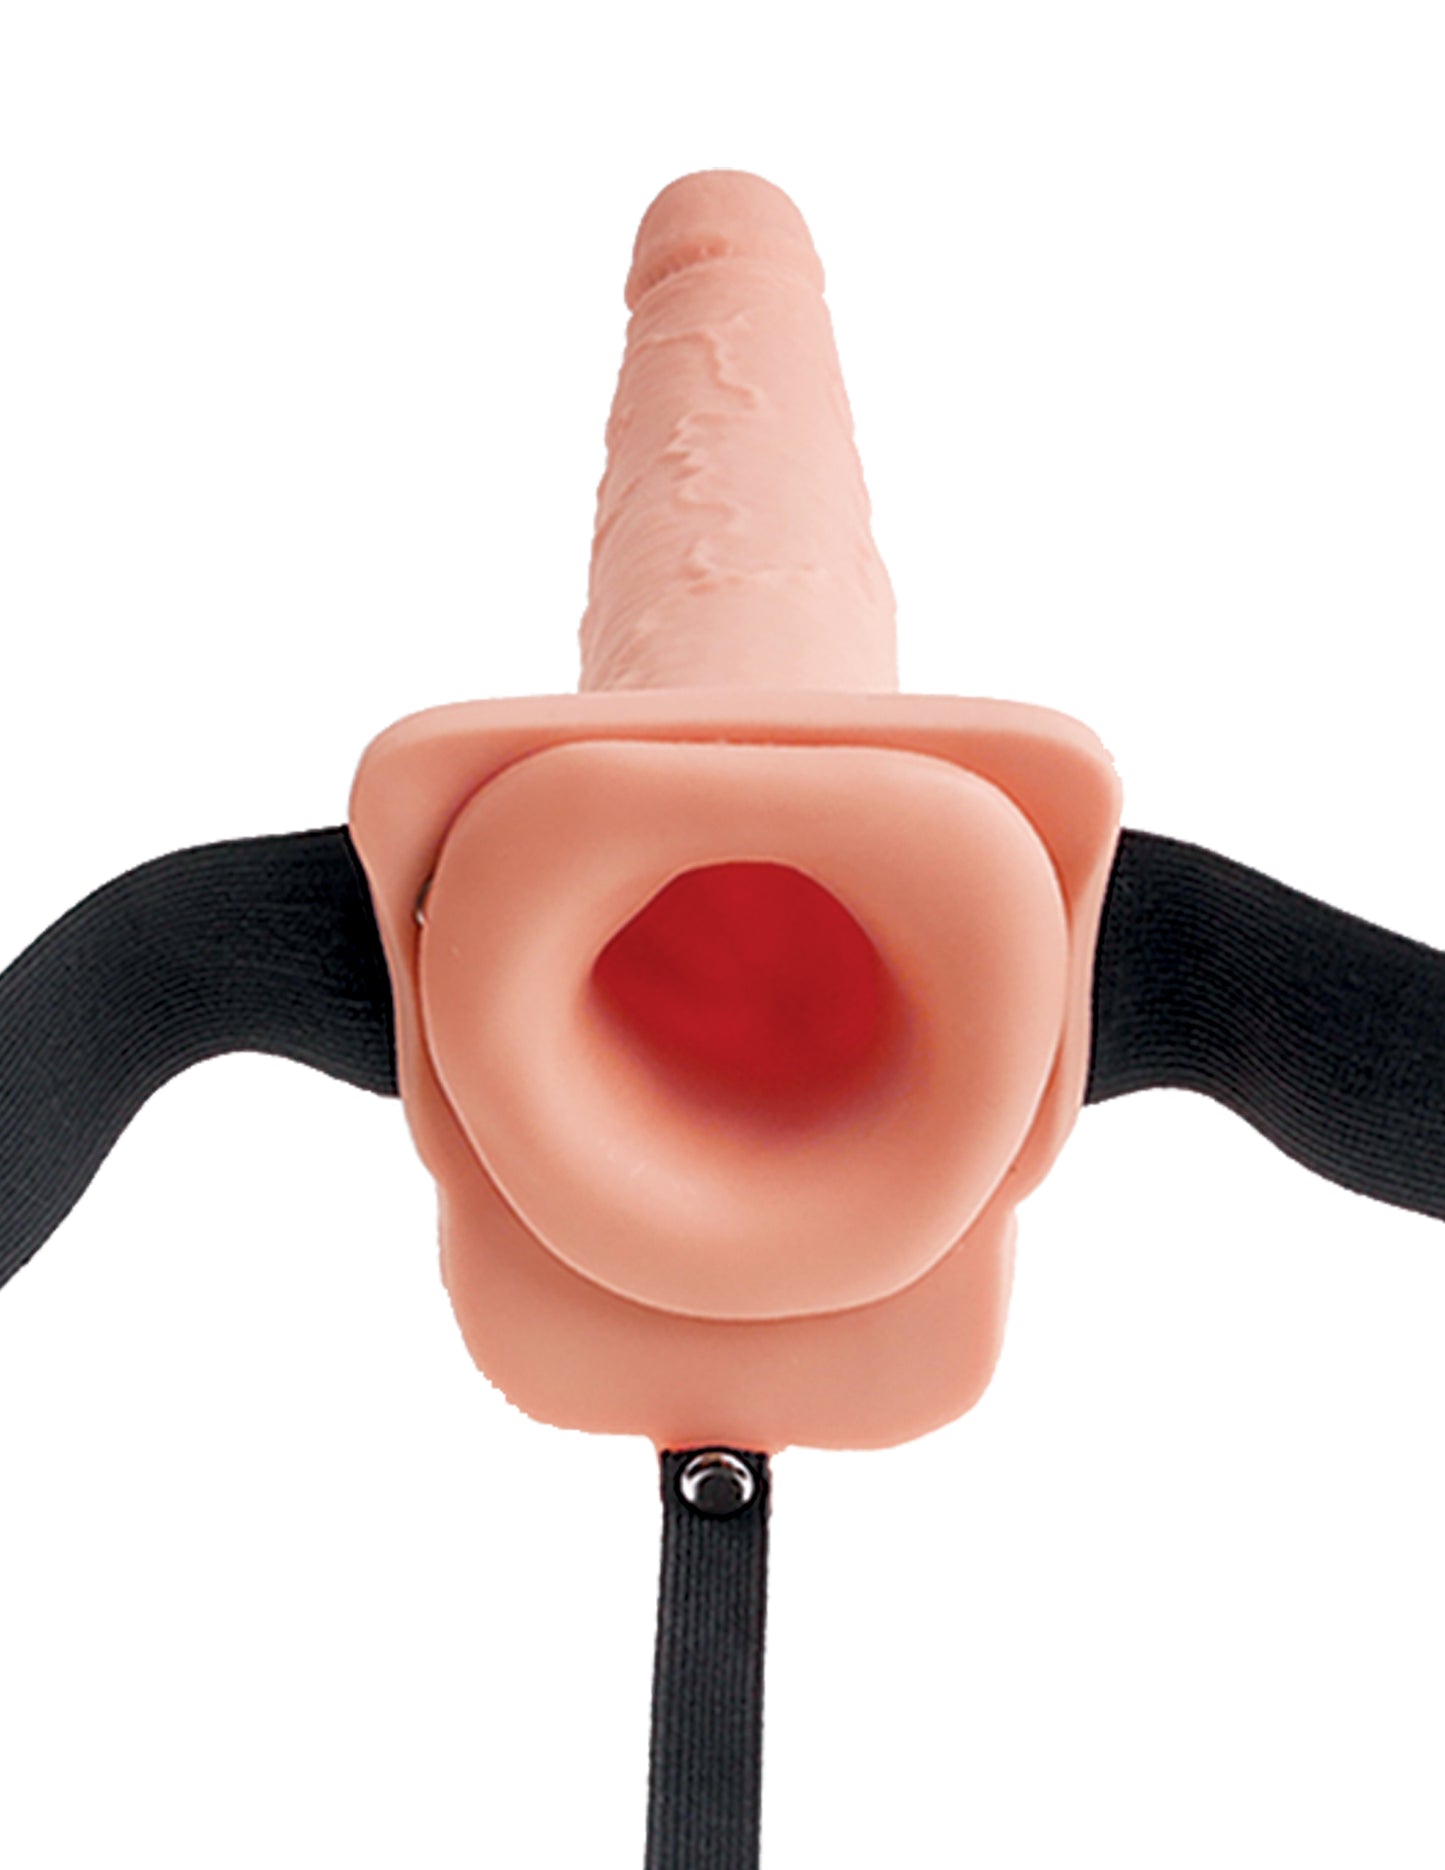 FETISH FANTASY 7.5 INCH HOLLOW SQUIRTING STRAP-ON WITH BALLS